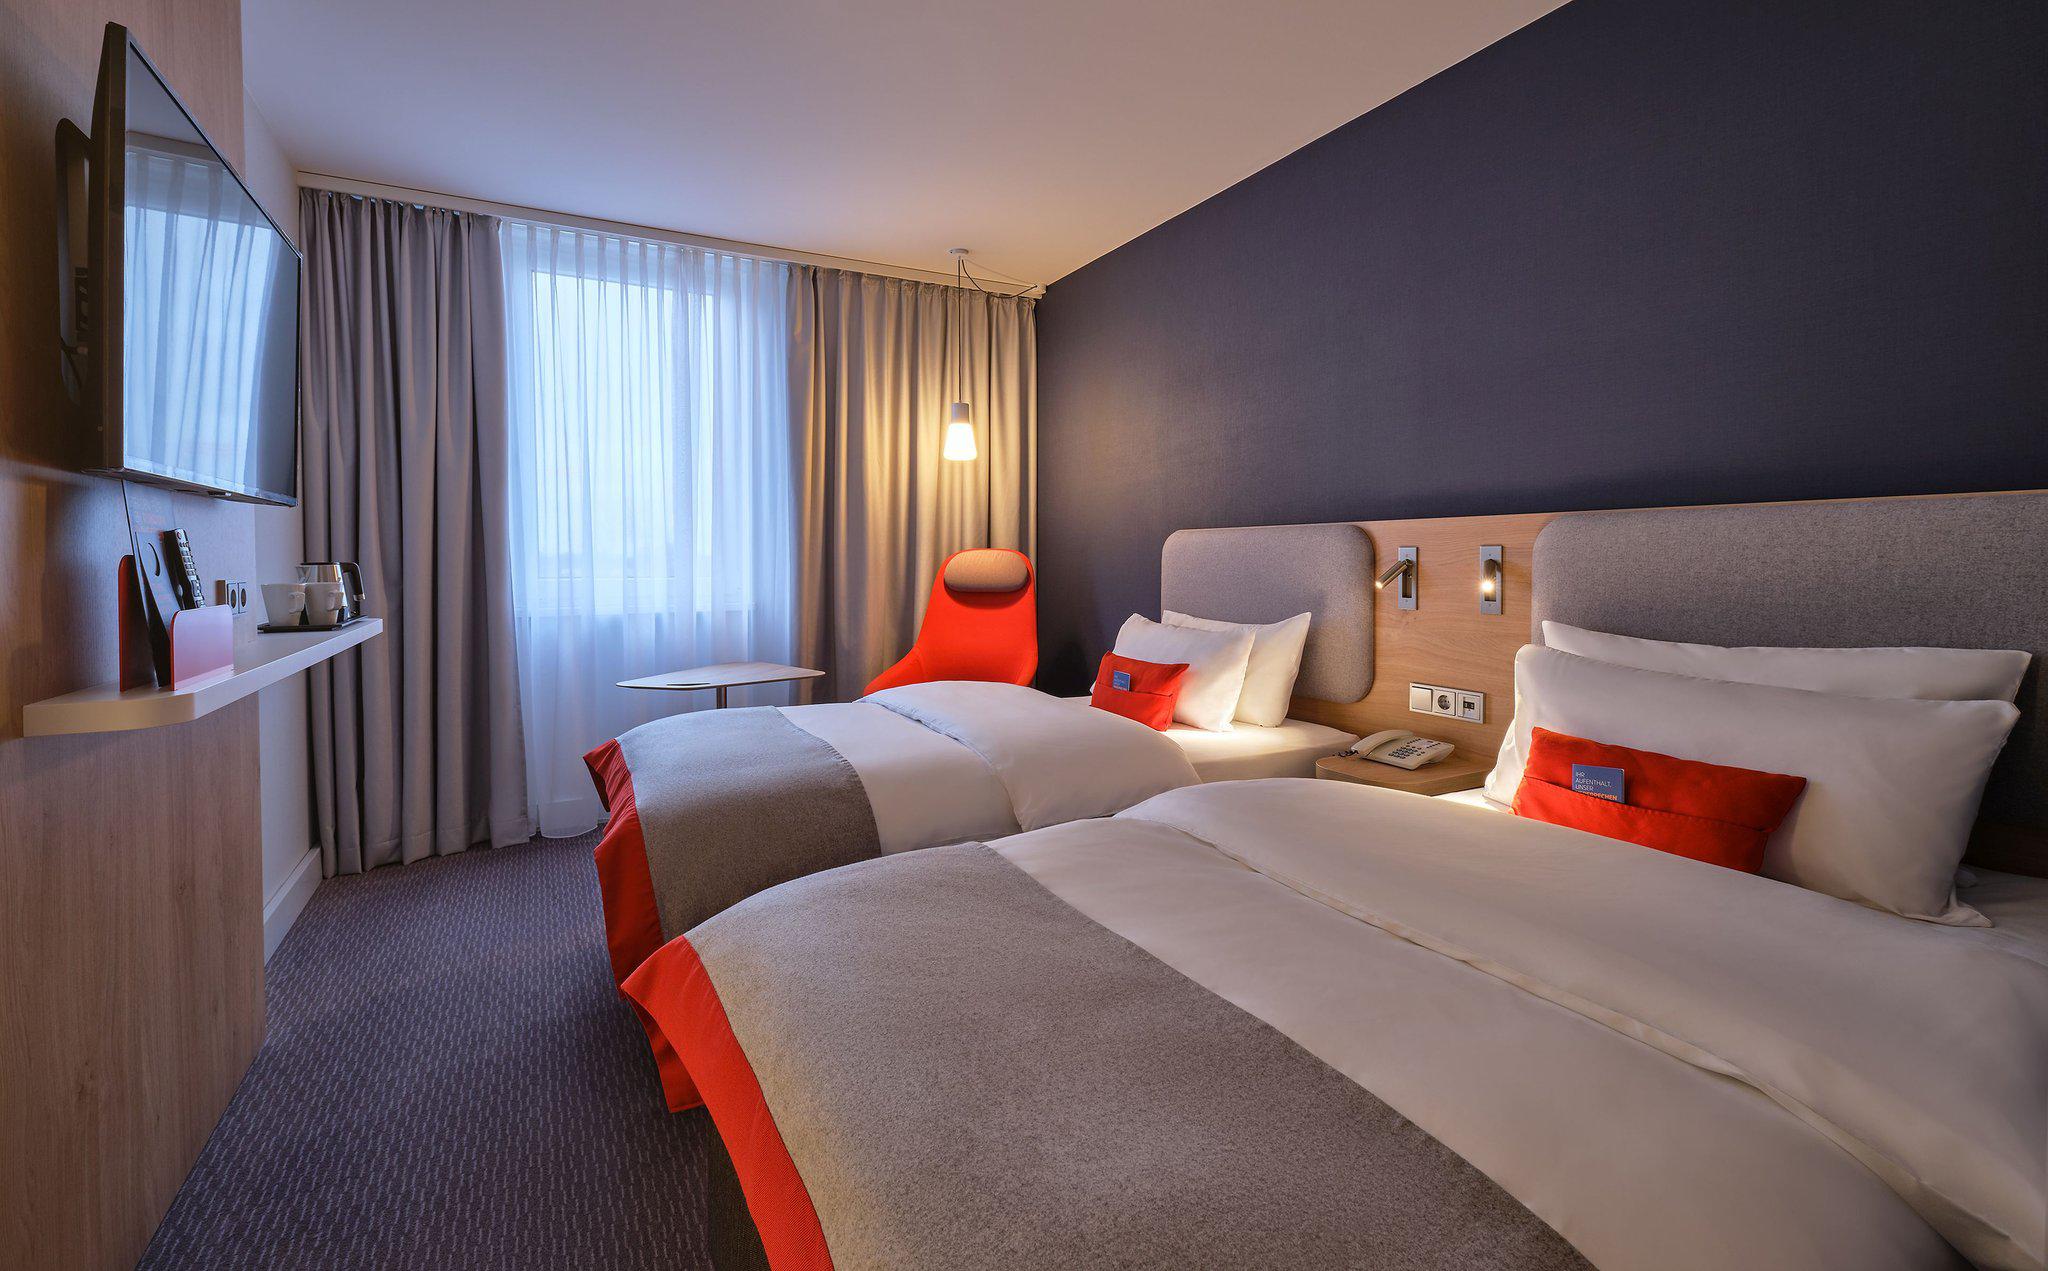 Holiday Inn Express Cologne - Muelheim, an IHG Hotel, Tiefentalstrasse 72 in Cologne